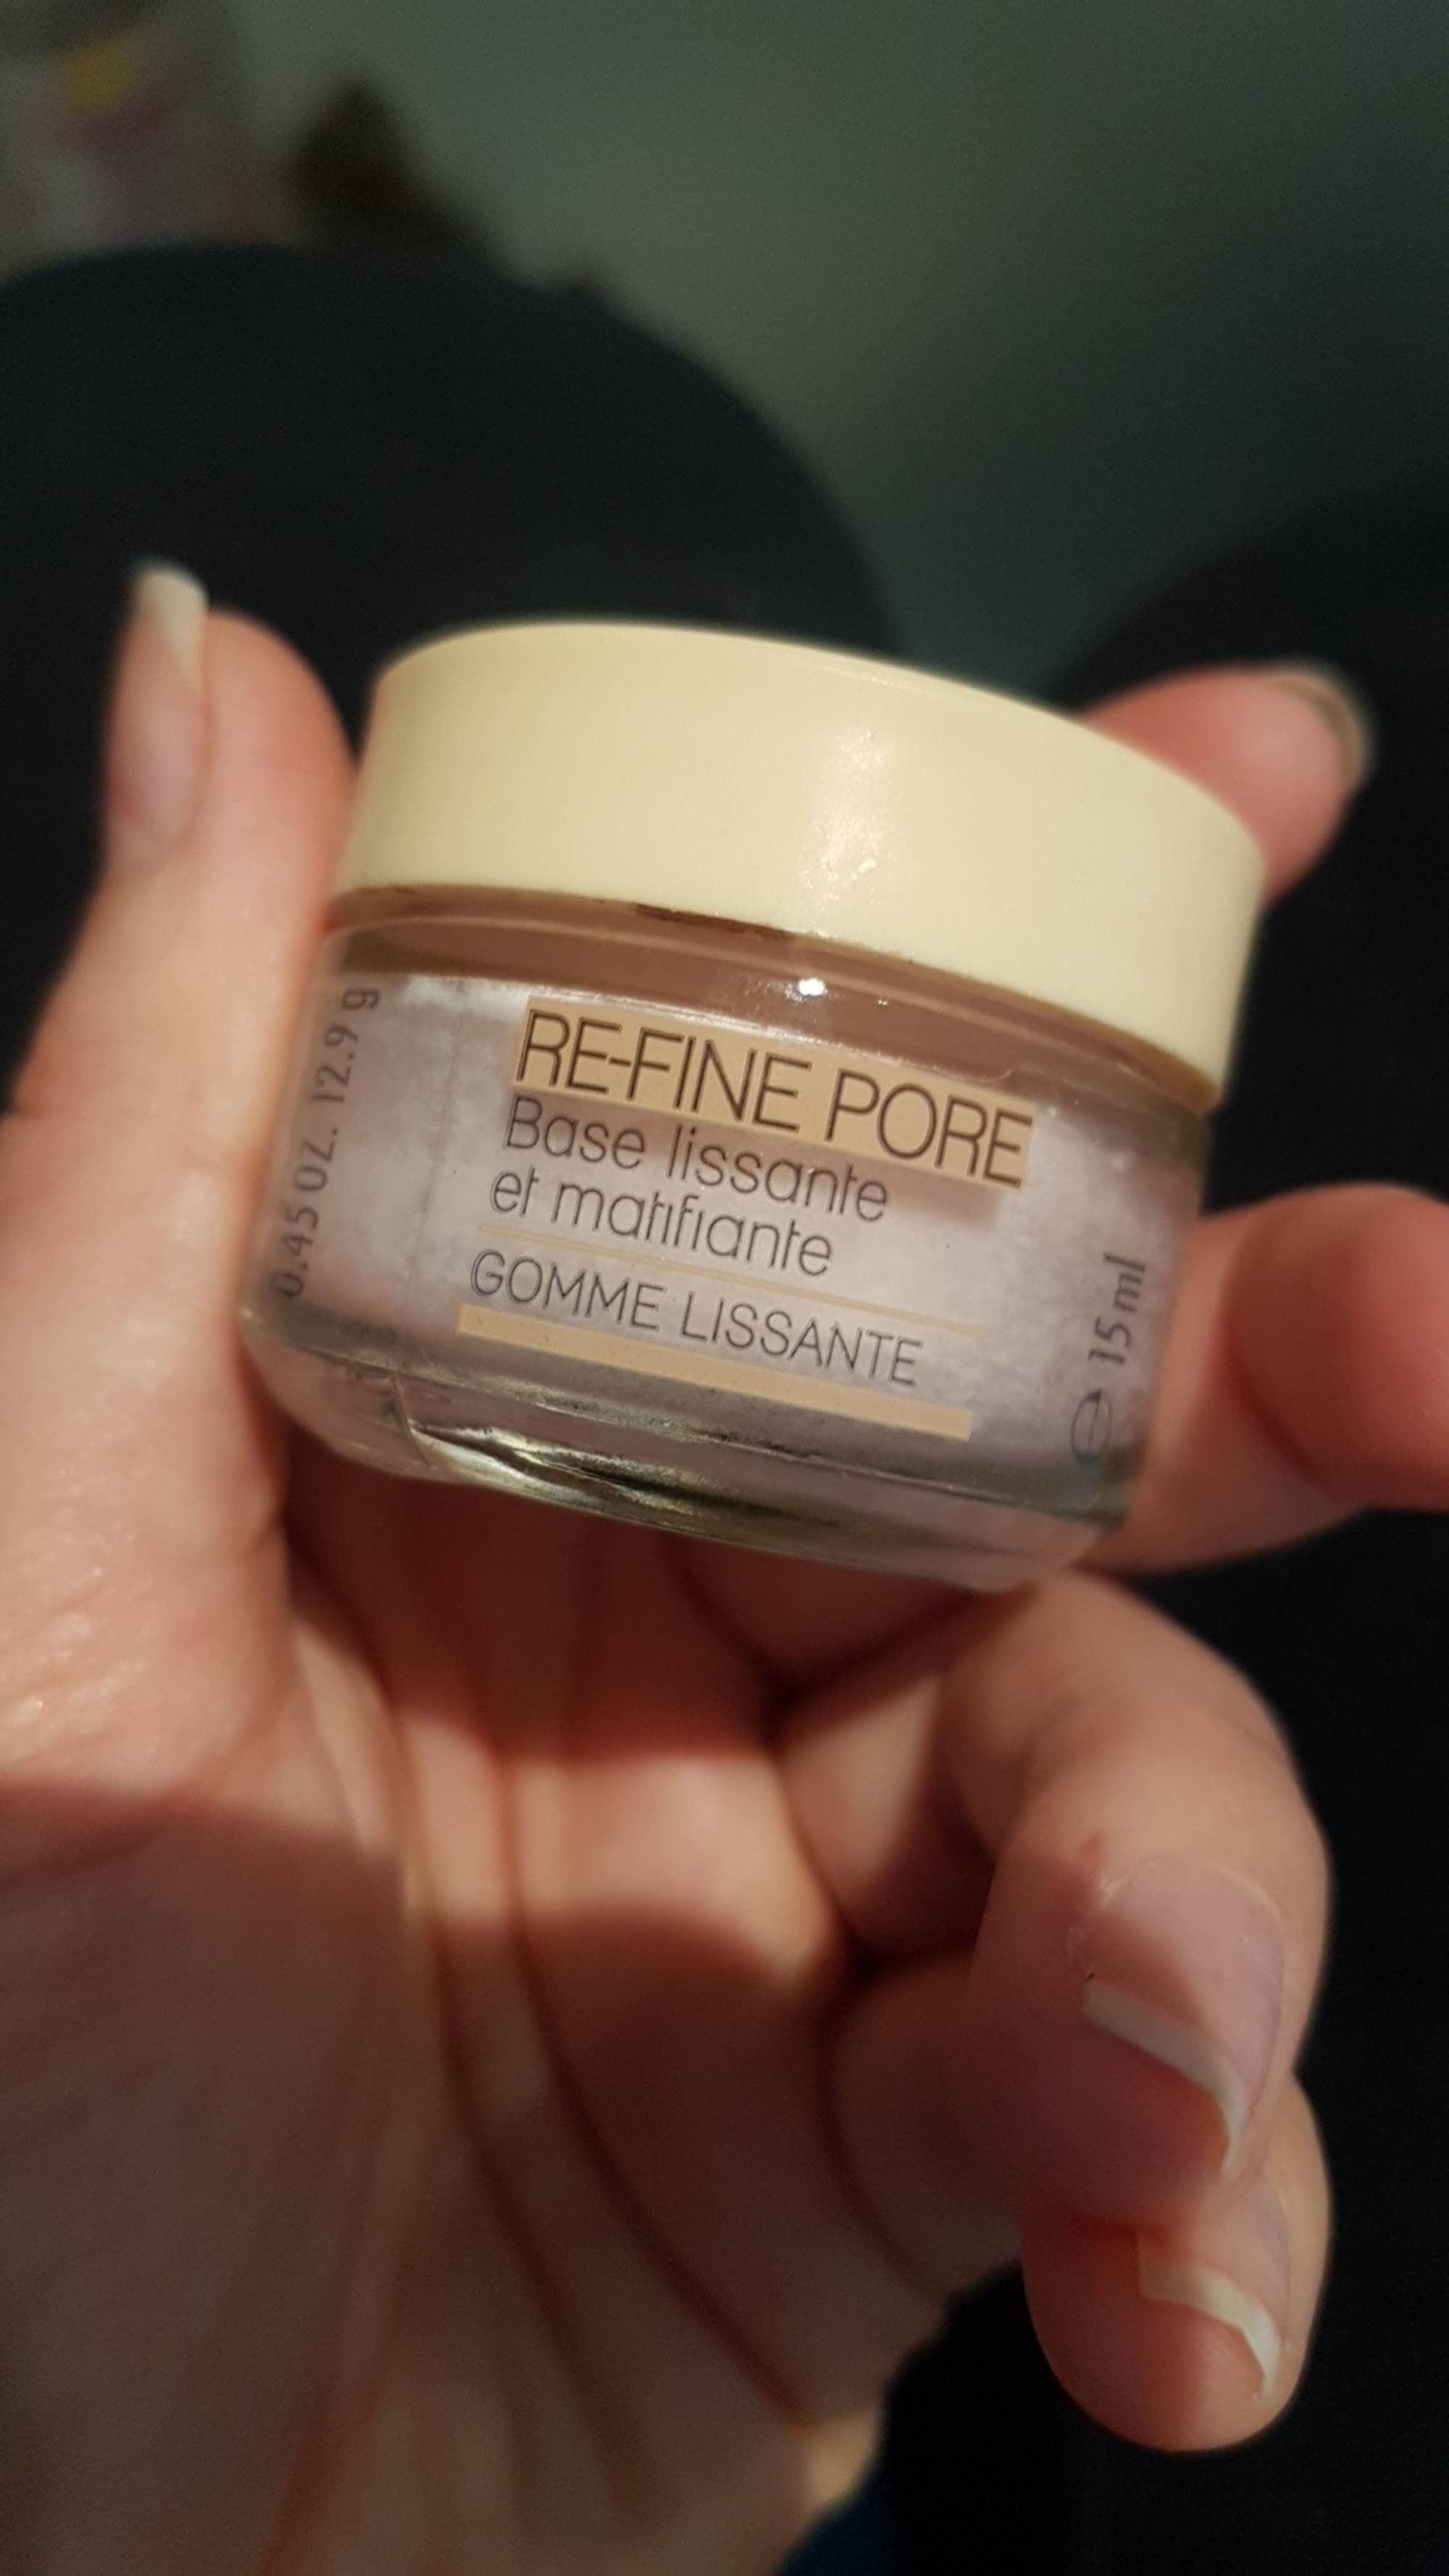 COSMENCE - Re-fine pore - Gomme lissante